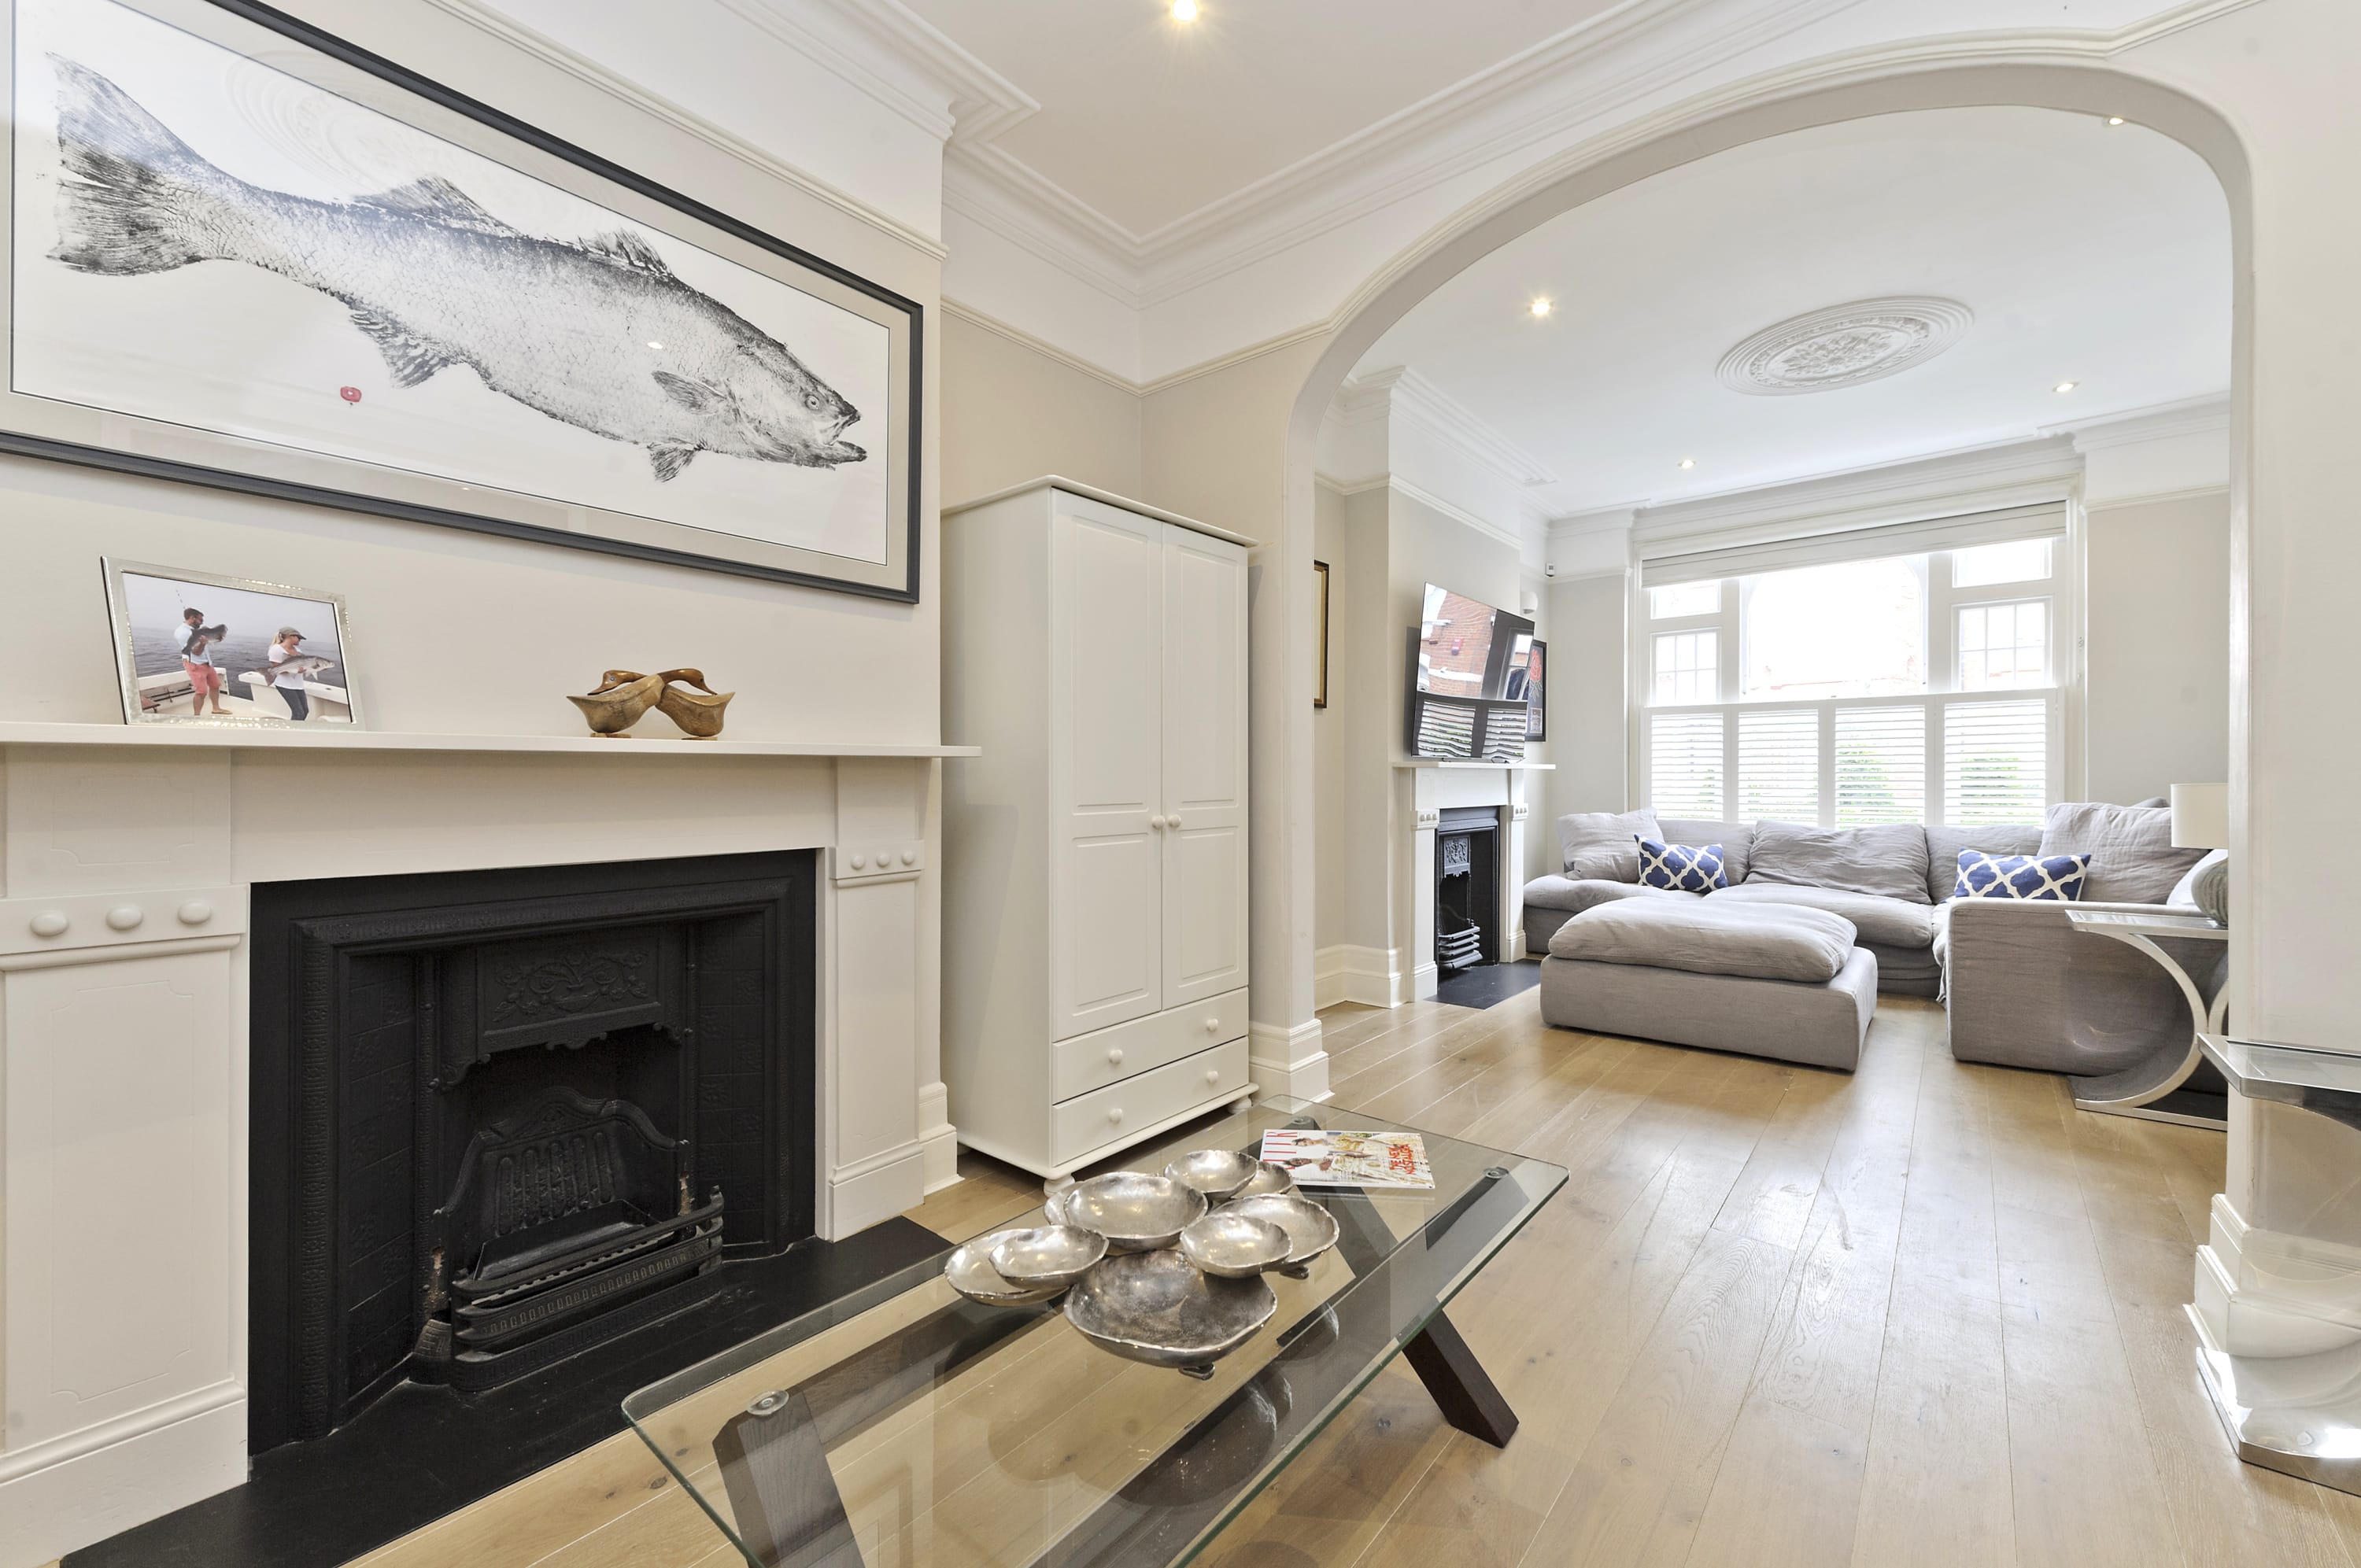 Property Image 1 - Stunning 4-bed family home with garden, Fulham